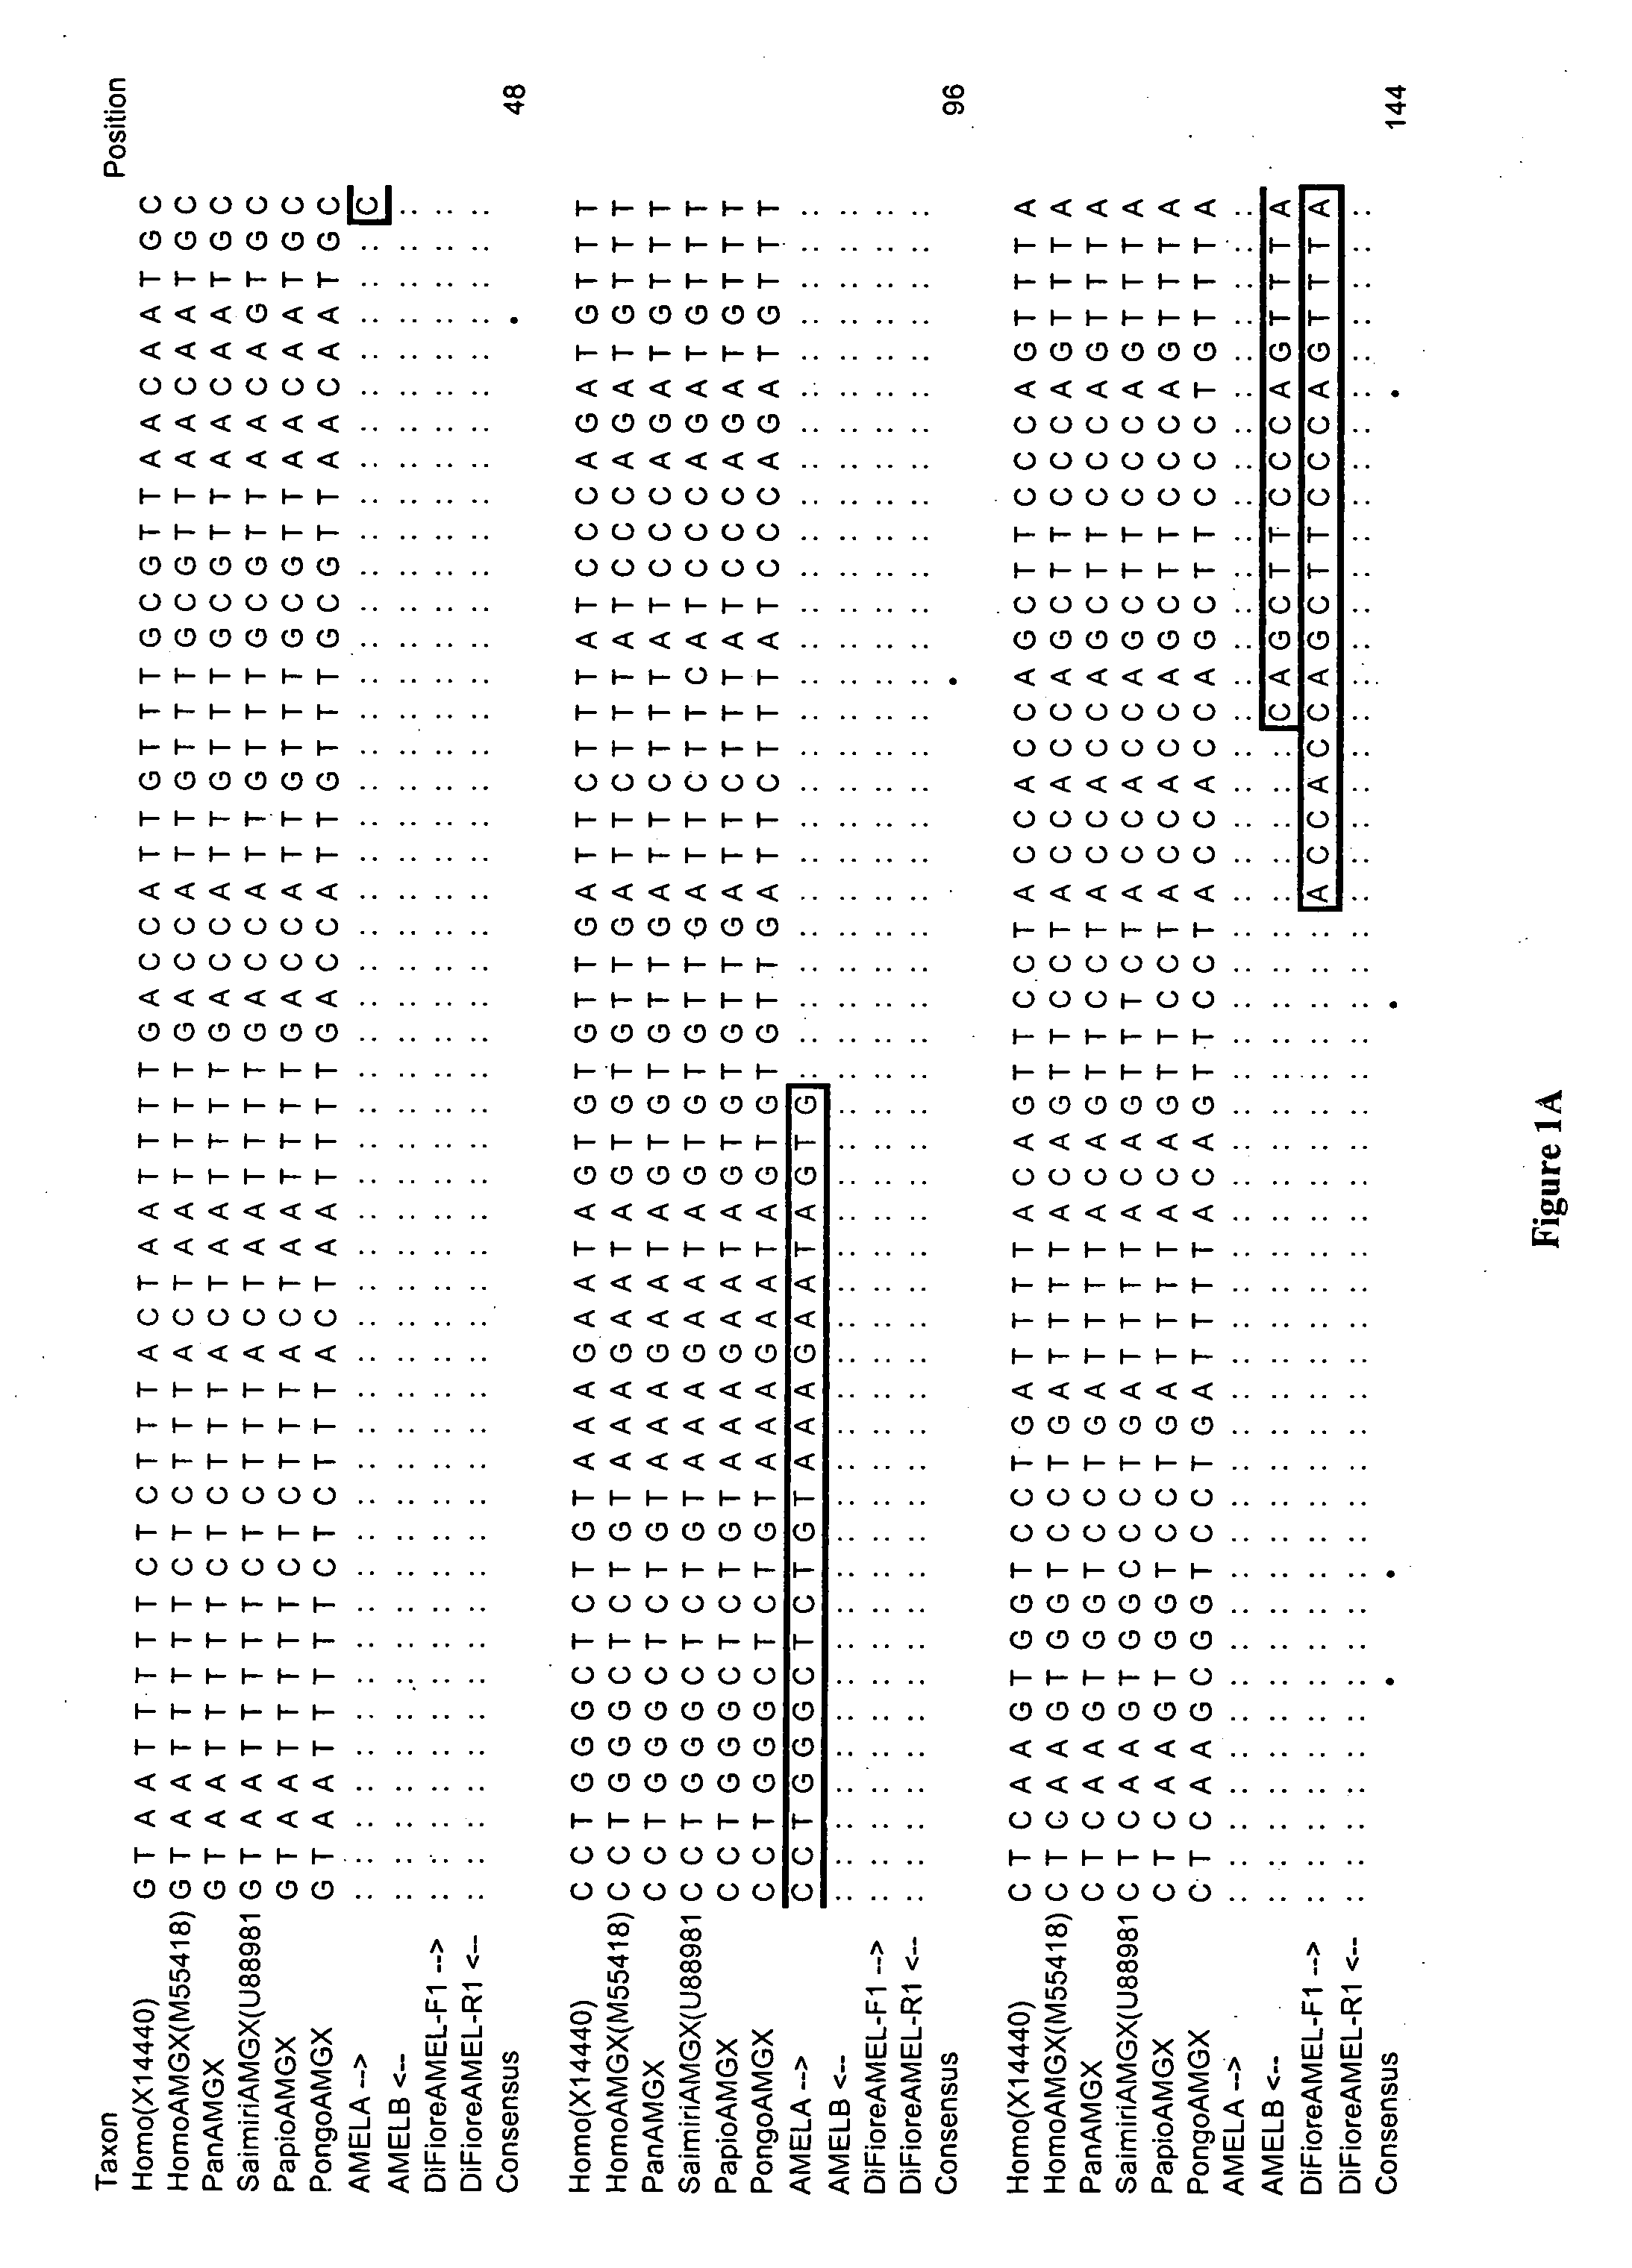 Assay for determining the sex of primates